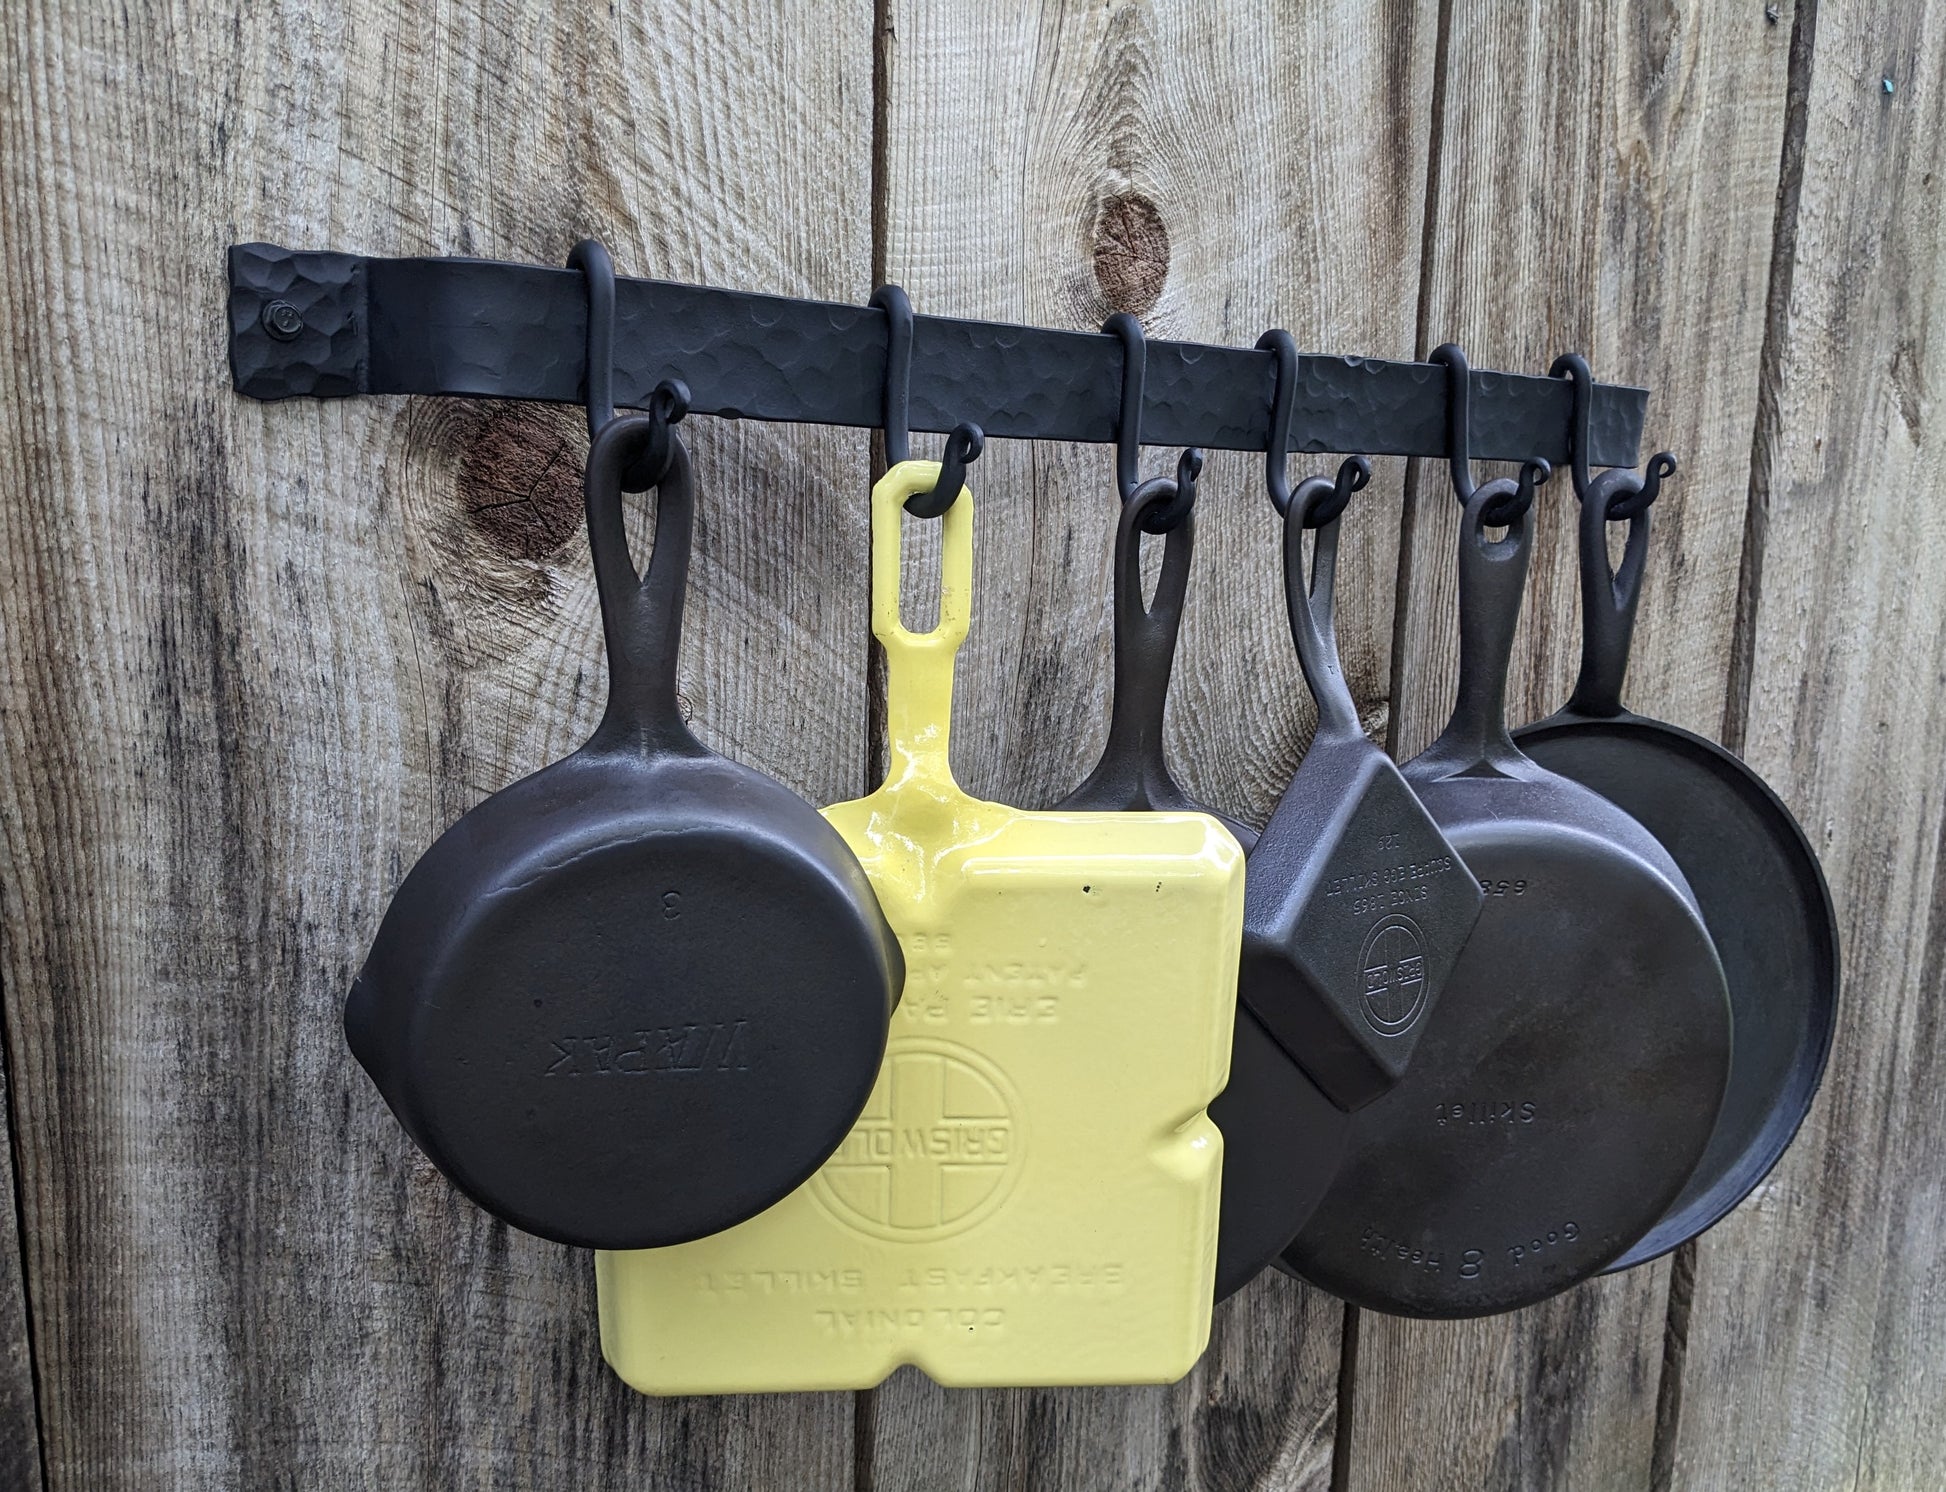 Hand Forged 36 Hammer Finish Pot Rack With Movable Hooks Sturdy Enough for Cast  Iron Display 